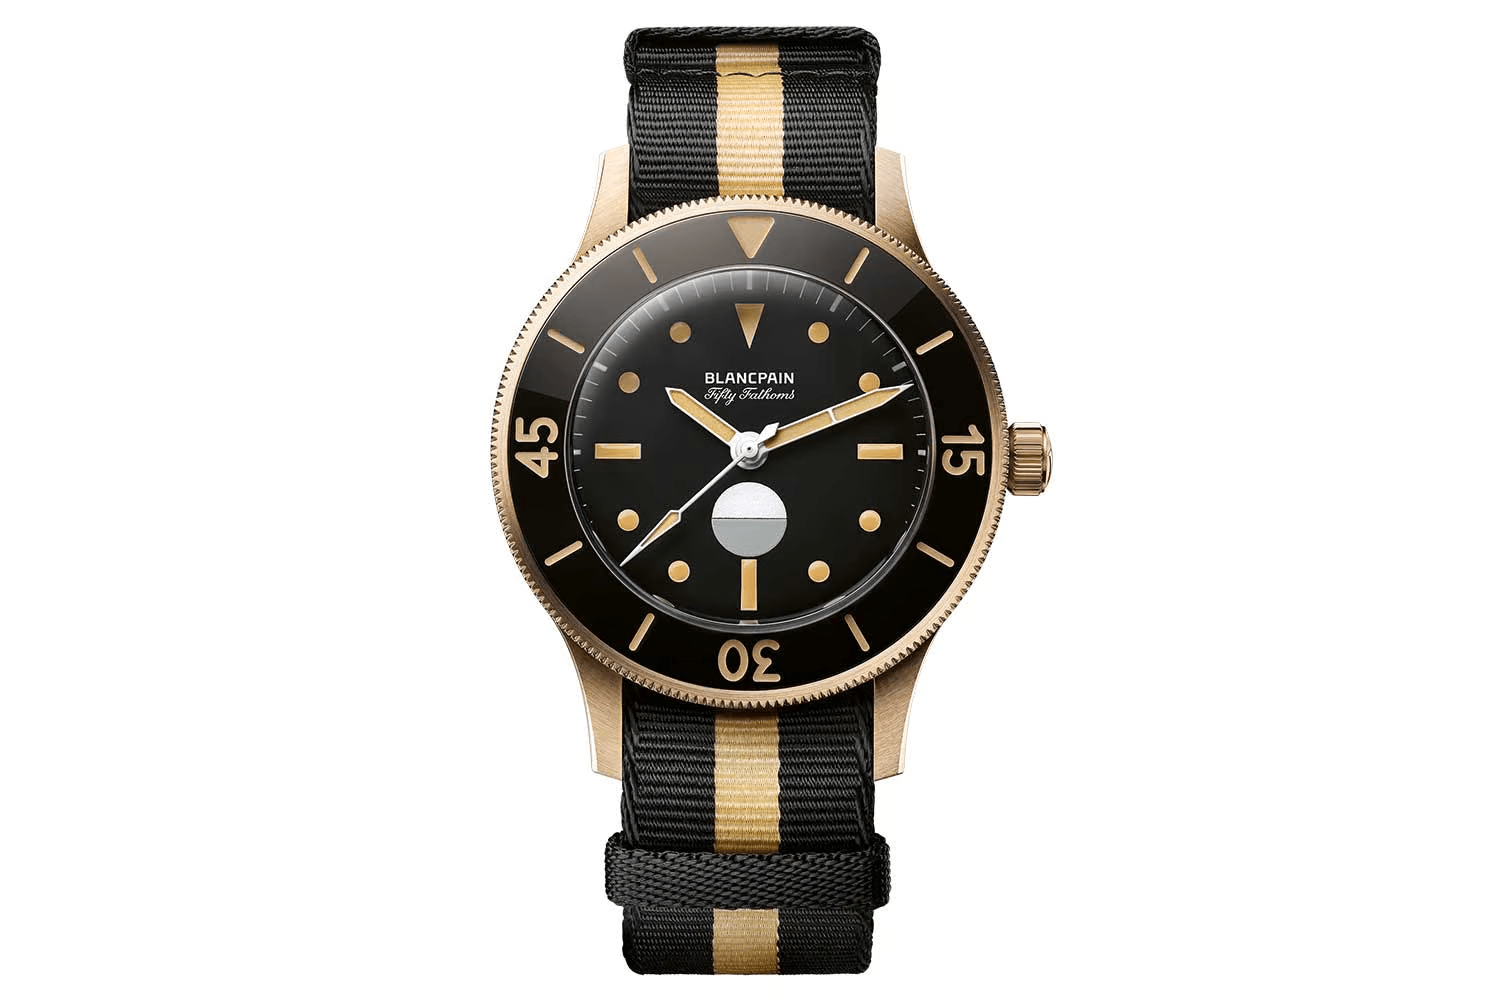 Đồng hồ Blancpain Fifty Fathoms 70th Anniversary Act 3